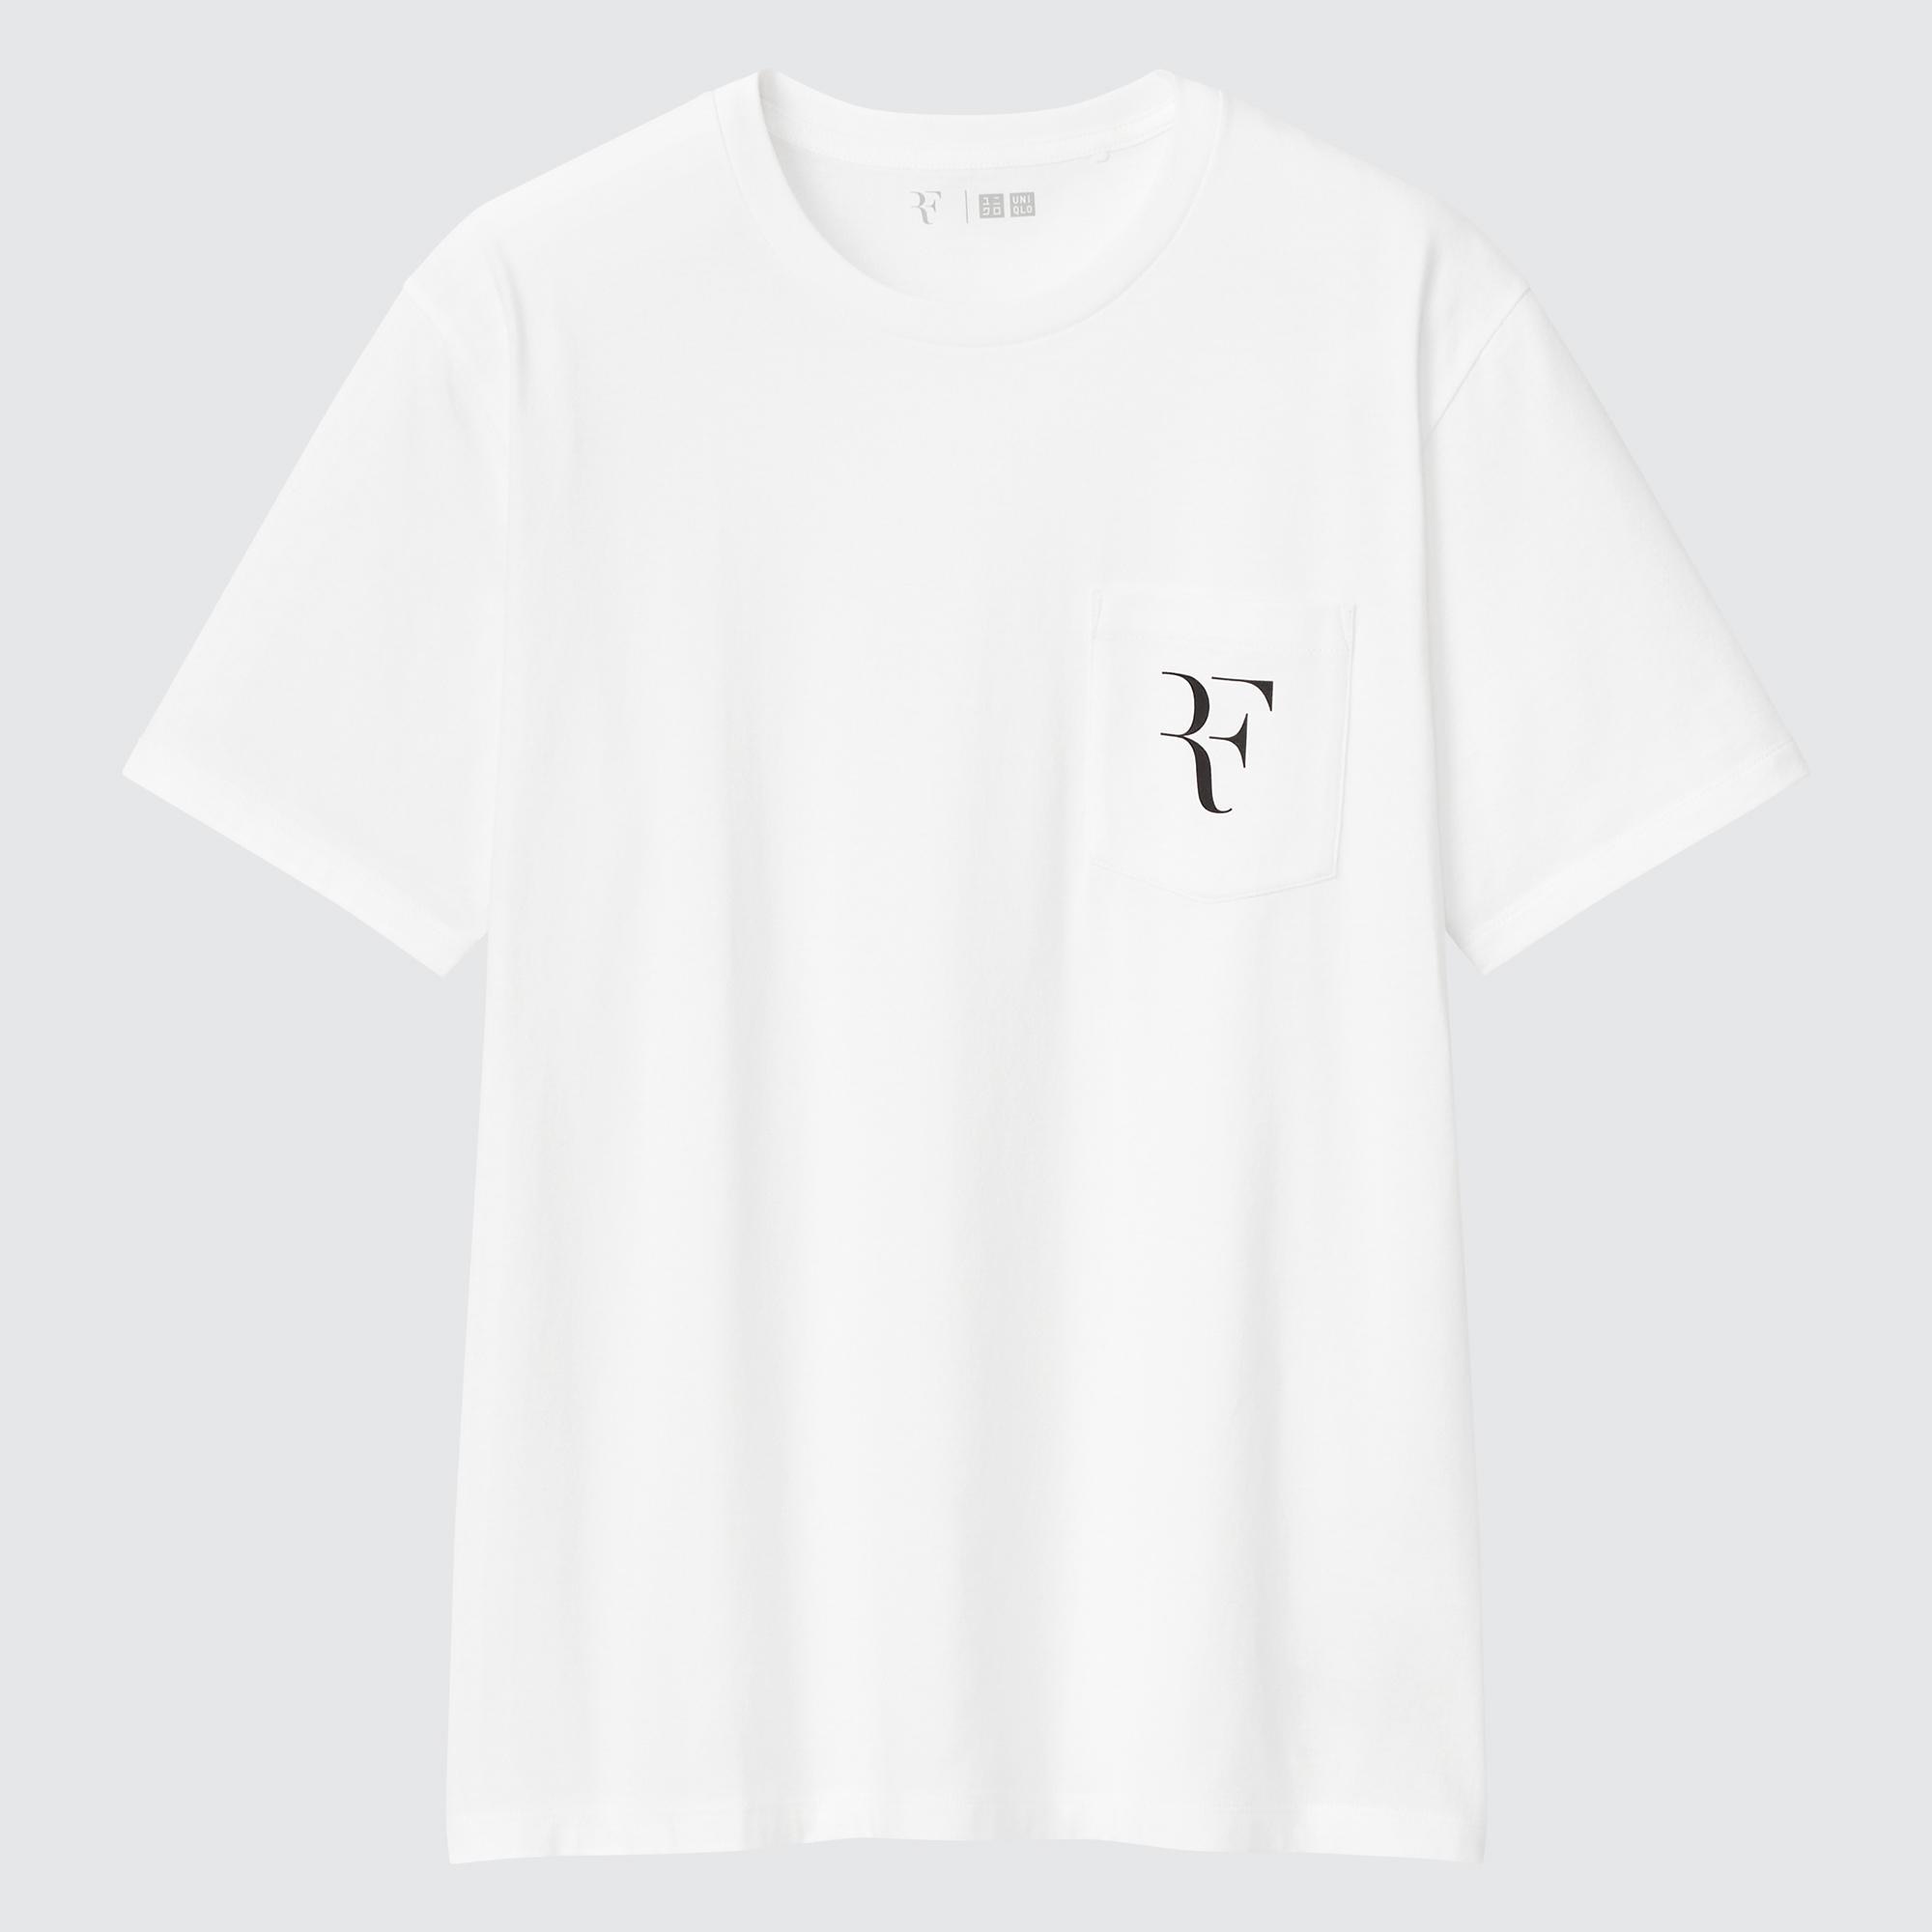 JW Anderson T-shirt in Ivory White for Men Mens Clothing T-shirts Short sleeve t-shirts 